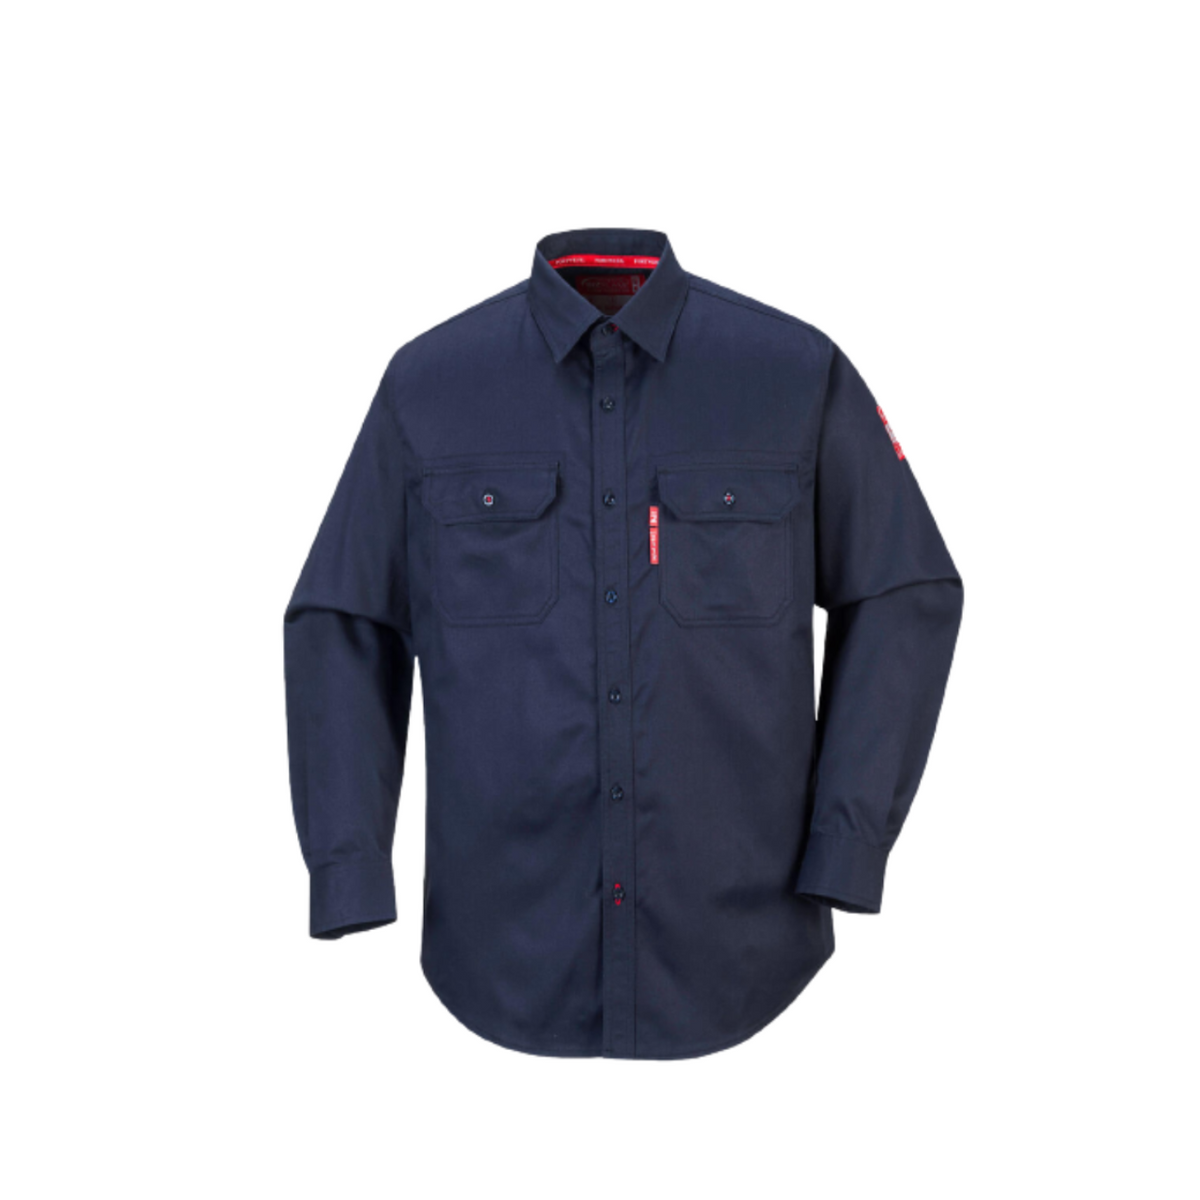 Portwest Bizflame 88/12 Shirt Navy Collared Button Flap Closure Long Sleeve FR89-Collins Clothing Co